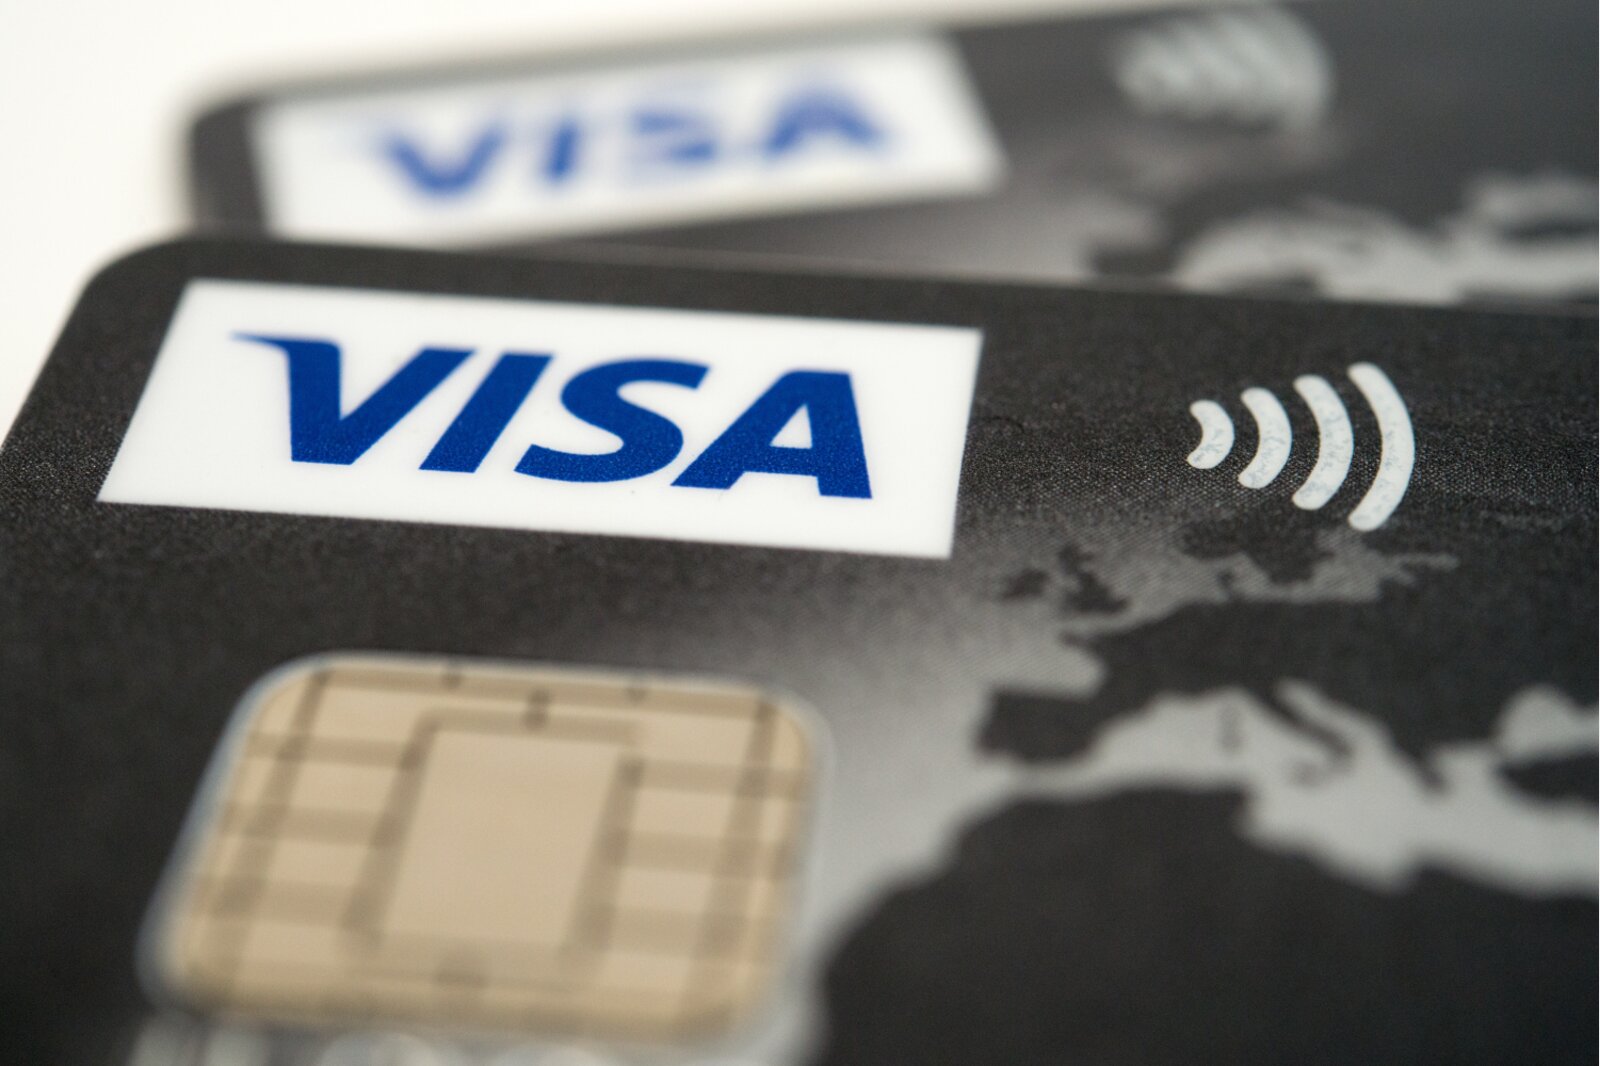 Visa plan to introduce fees for debit cards that are somewhat higher than the level deem appropriate by the COMCO. (Picture: Keystone)